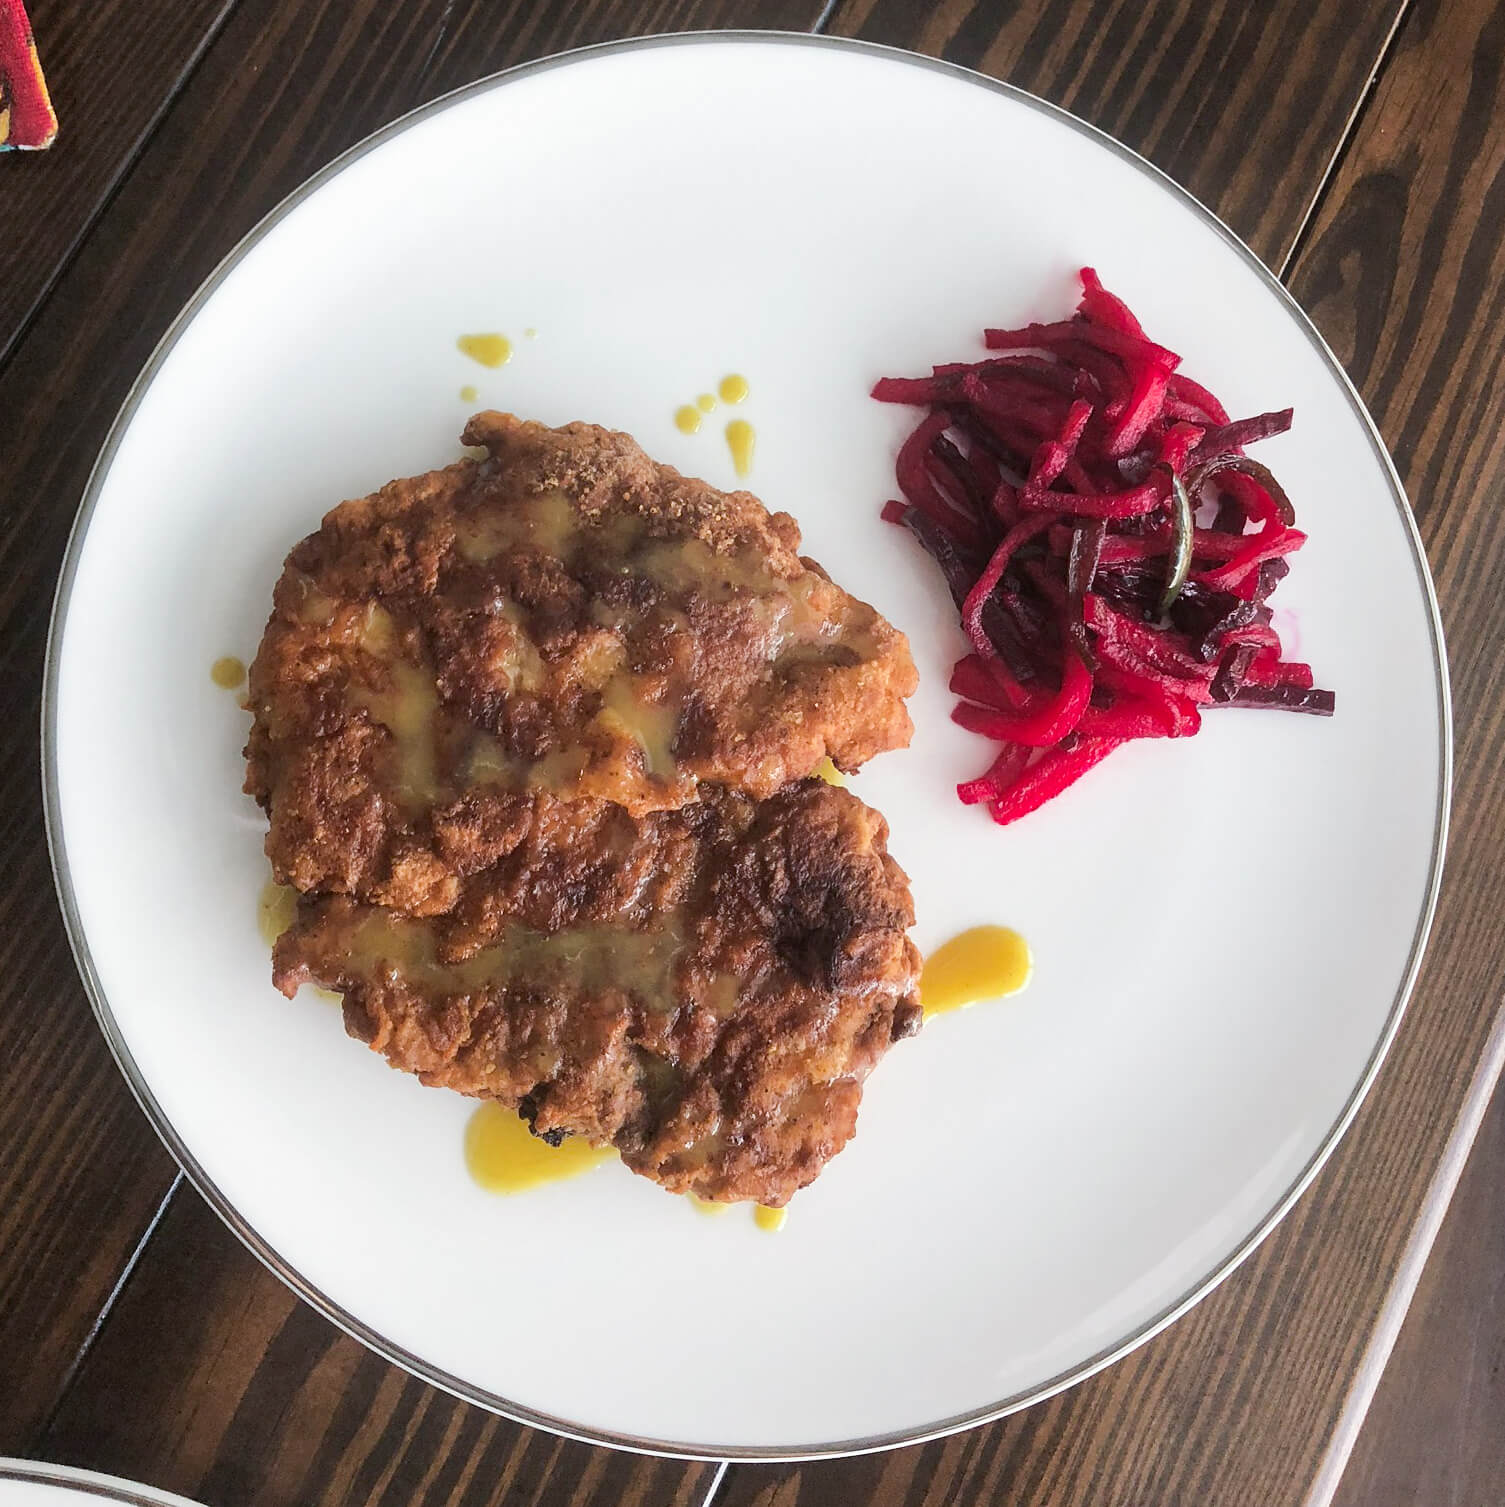 Fried Pork Chop with Honey Mustard and Beet Slaw